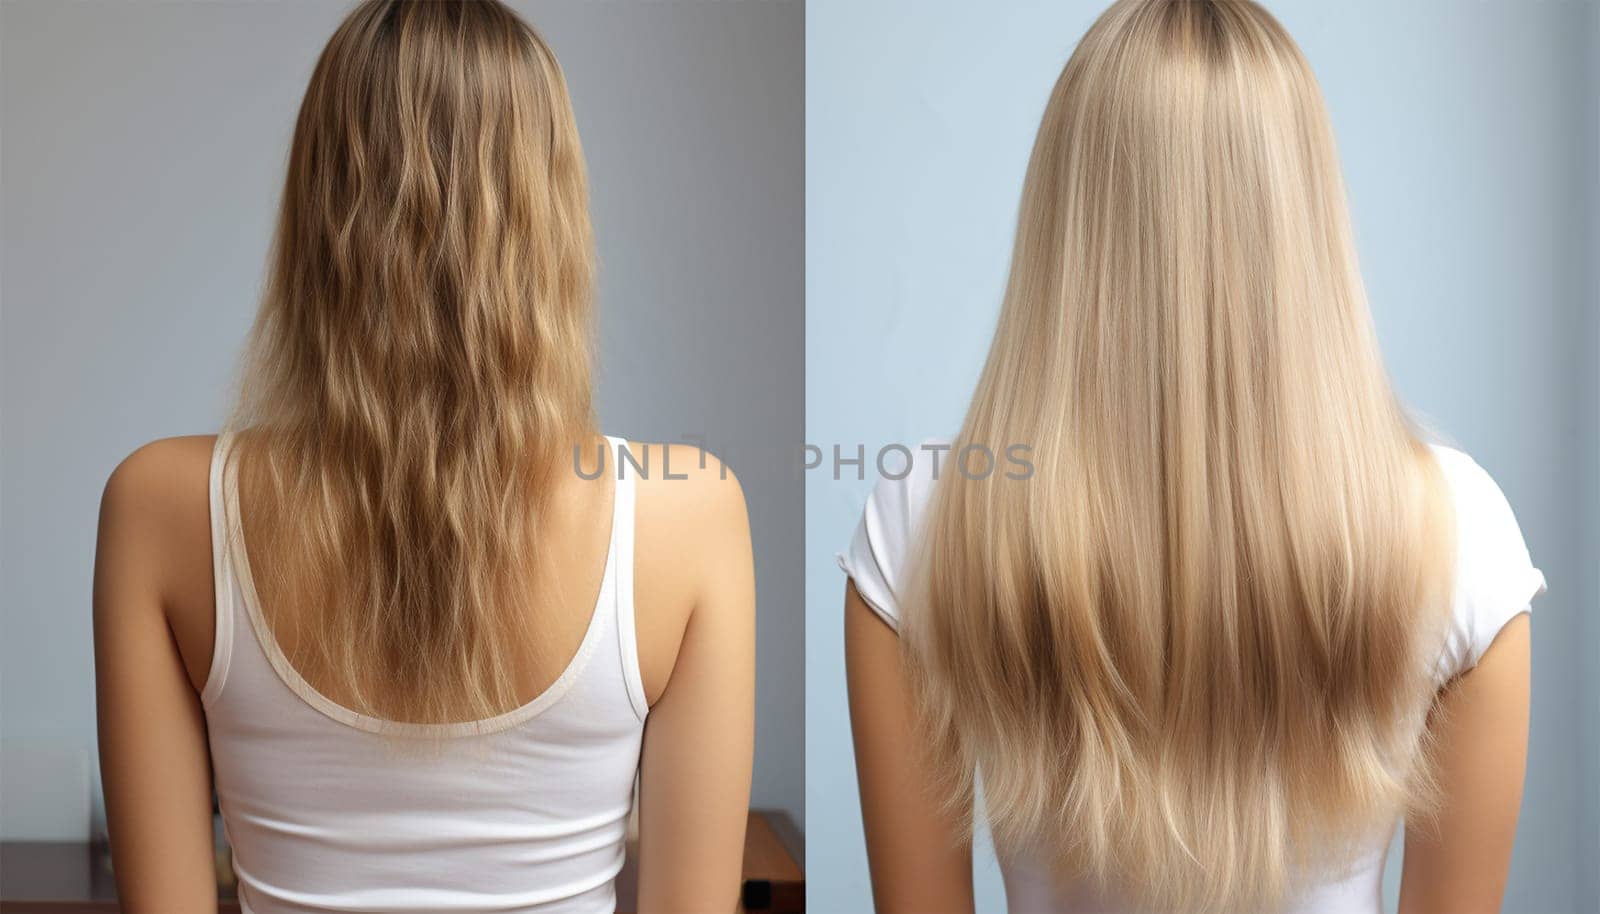 Woman before and after hair extensions on white background. Hair extension, beauty, tress, hair growth, styling, salon concept. Length and volume. Beauty hair treatment concept by Annebel146